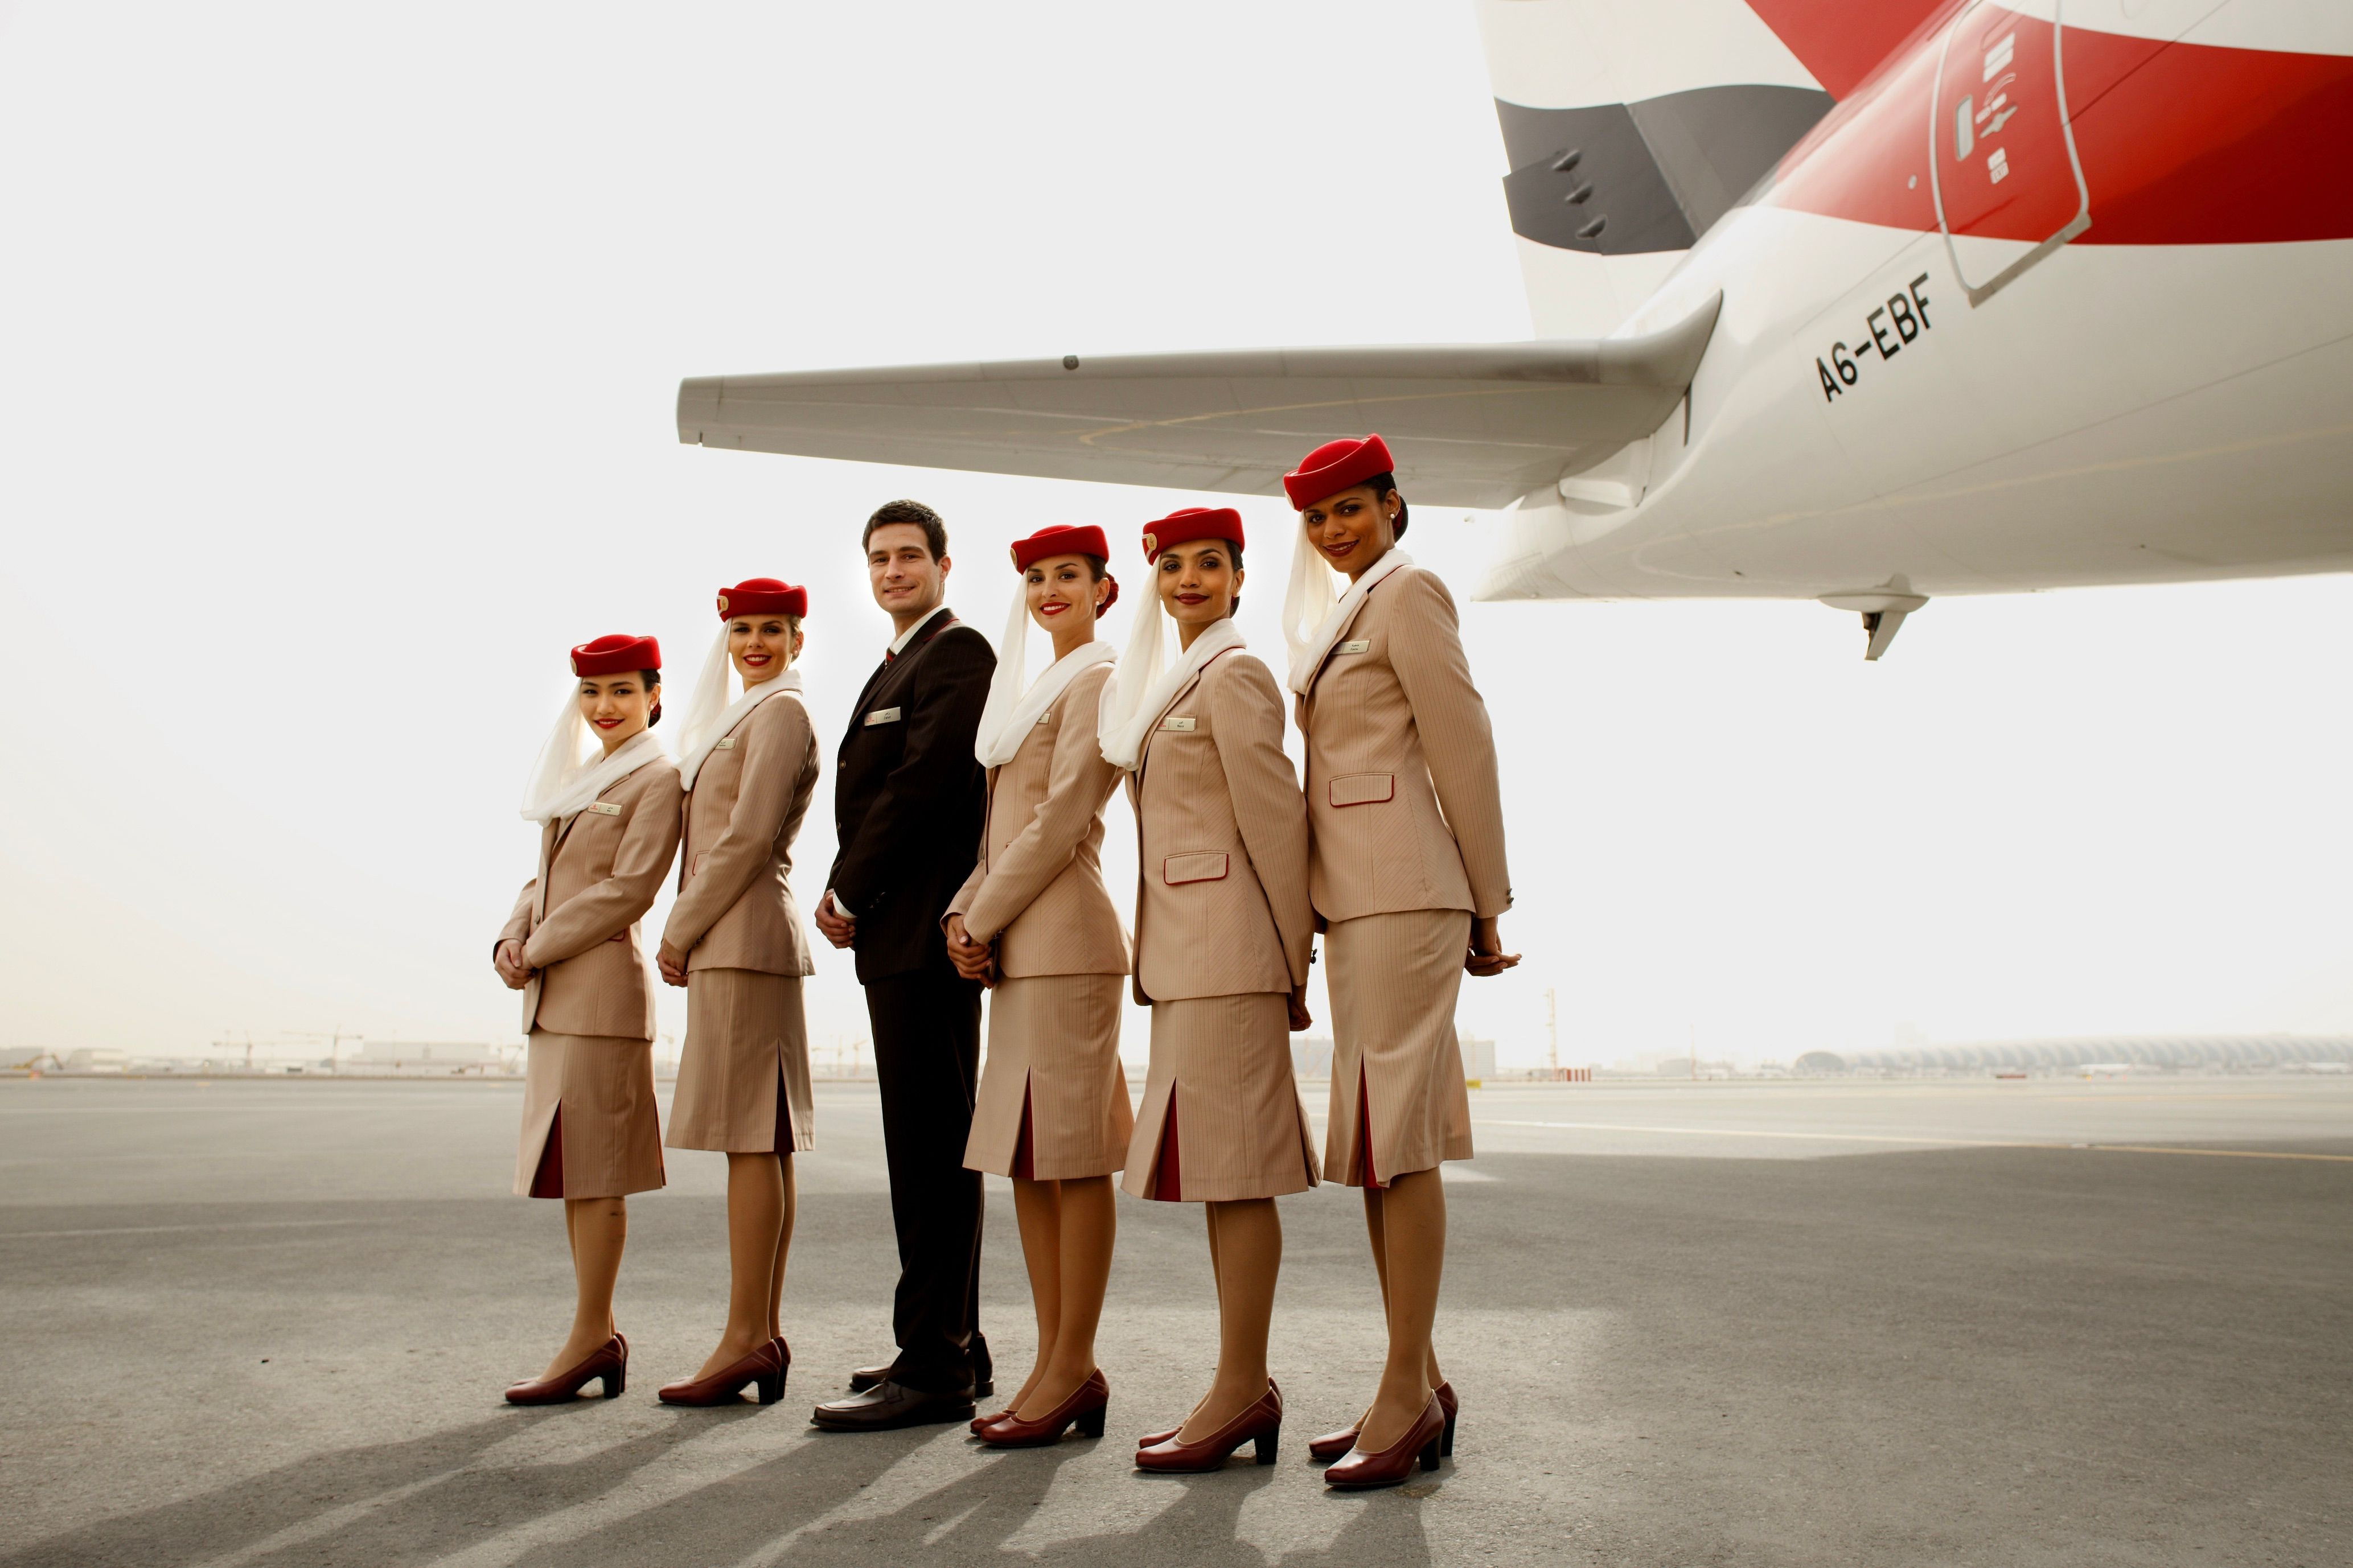 Several Emirates cabin crew standing next to an aircraft.